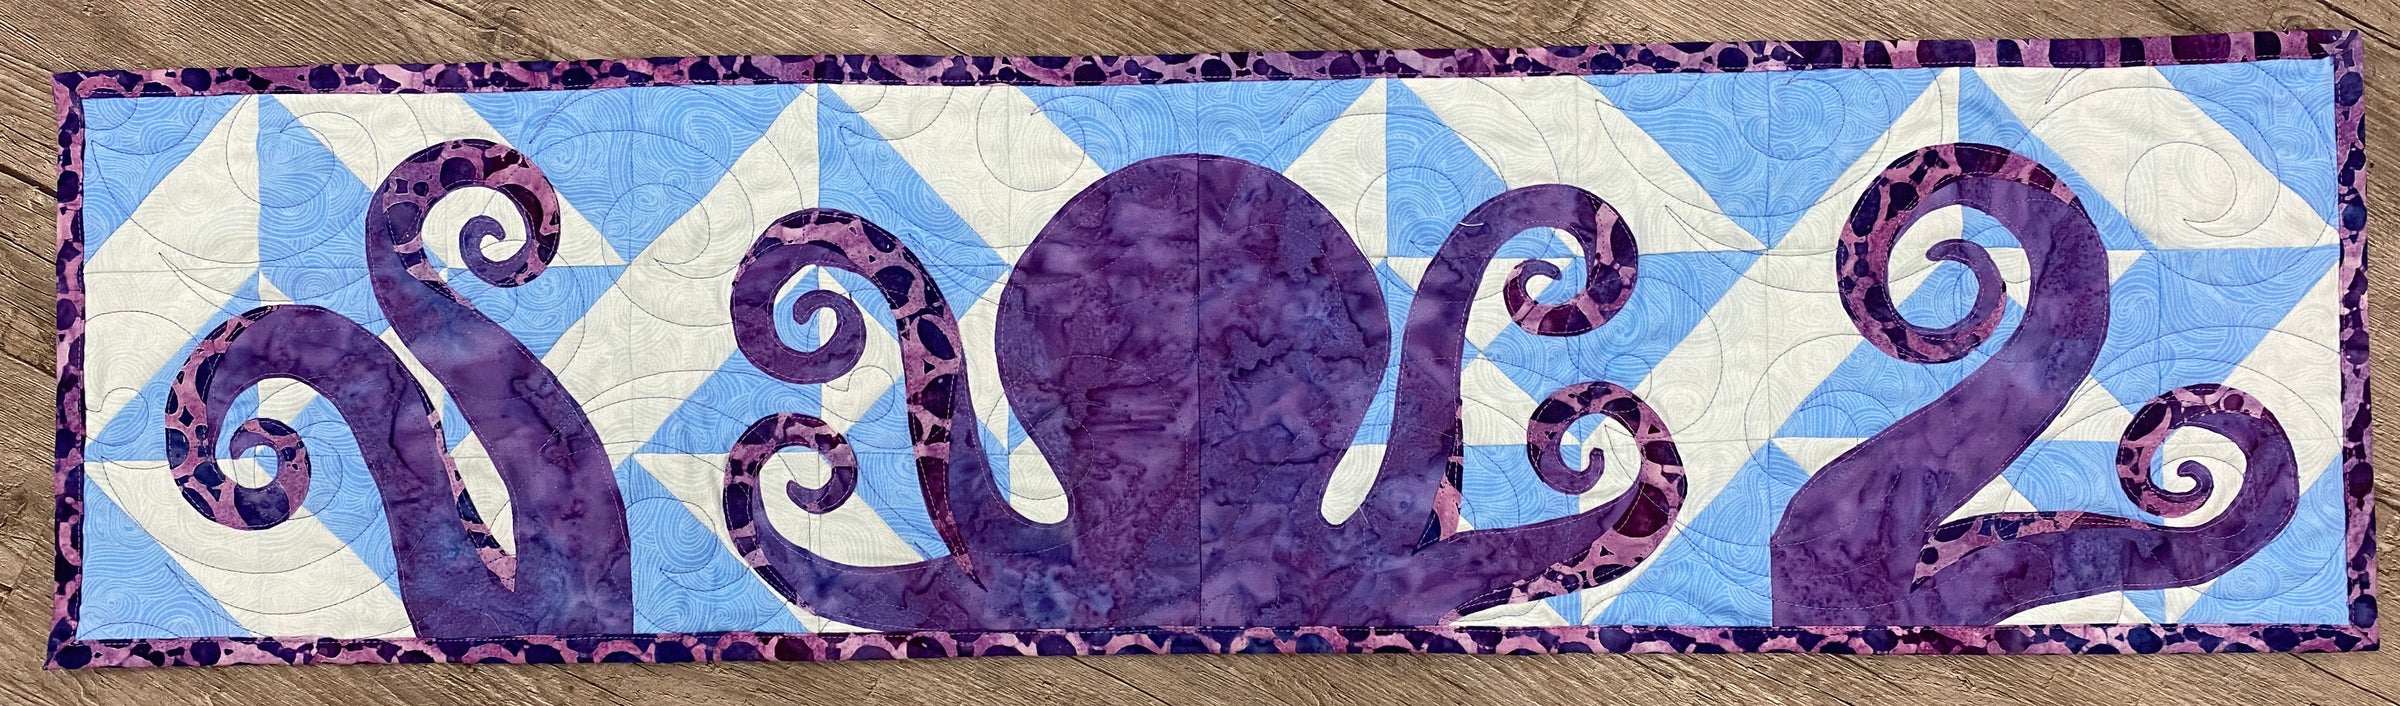 Quilters Trek 2020 Digital Pattern - The Octopus One - Digital Download Only